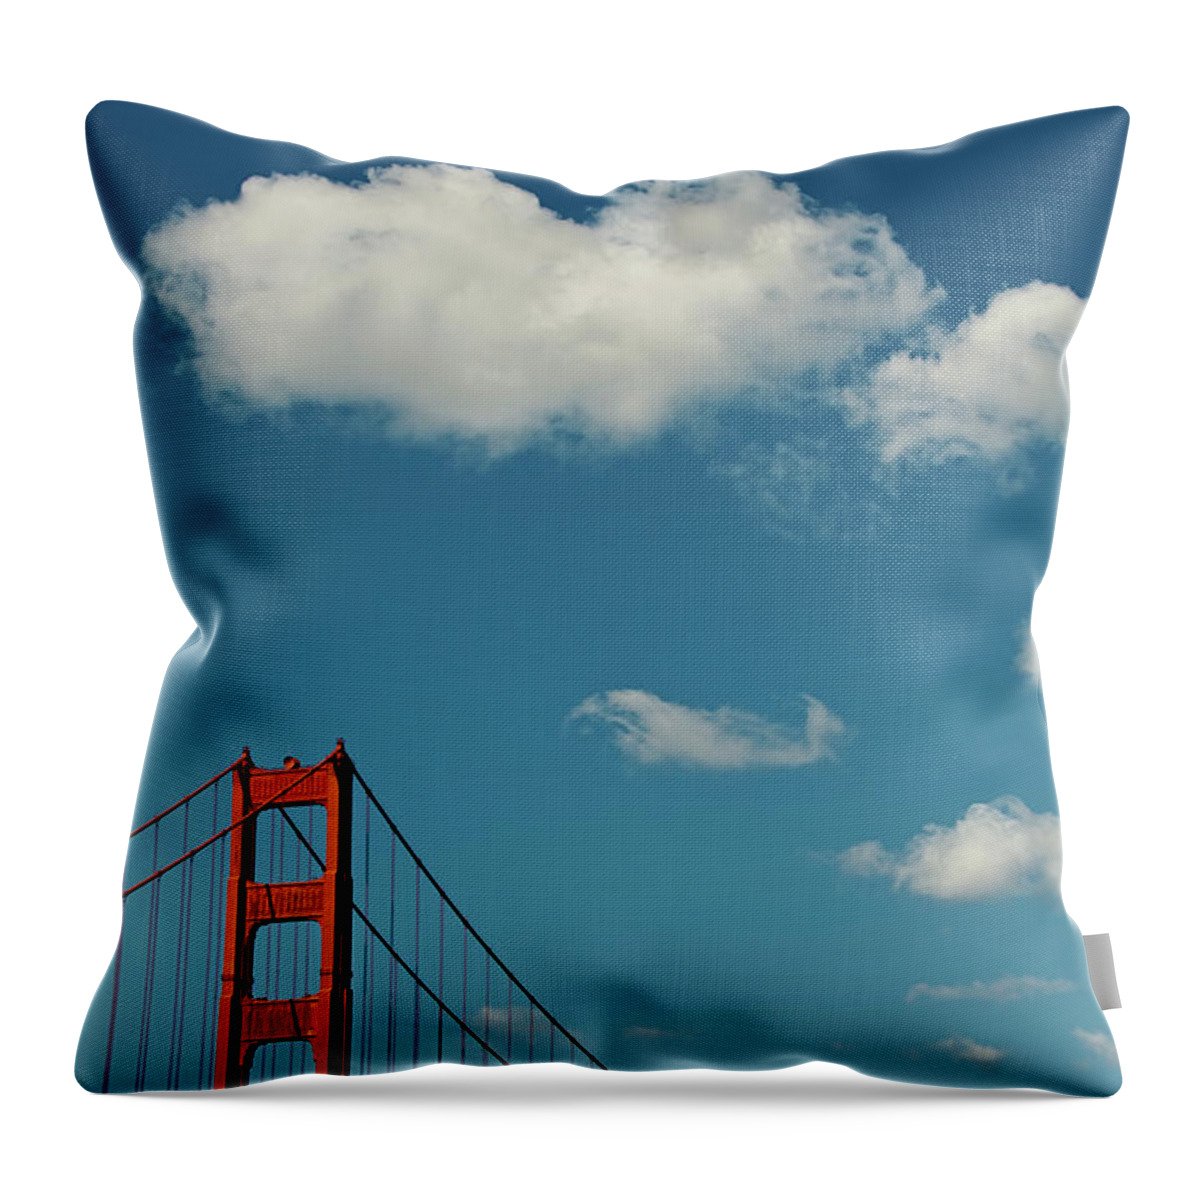 San Francisco Throw Pillow featuring the photograph Clouds Over The Golden Gate by Enrique R. Aguirre Aves